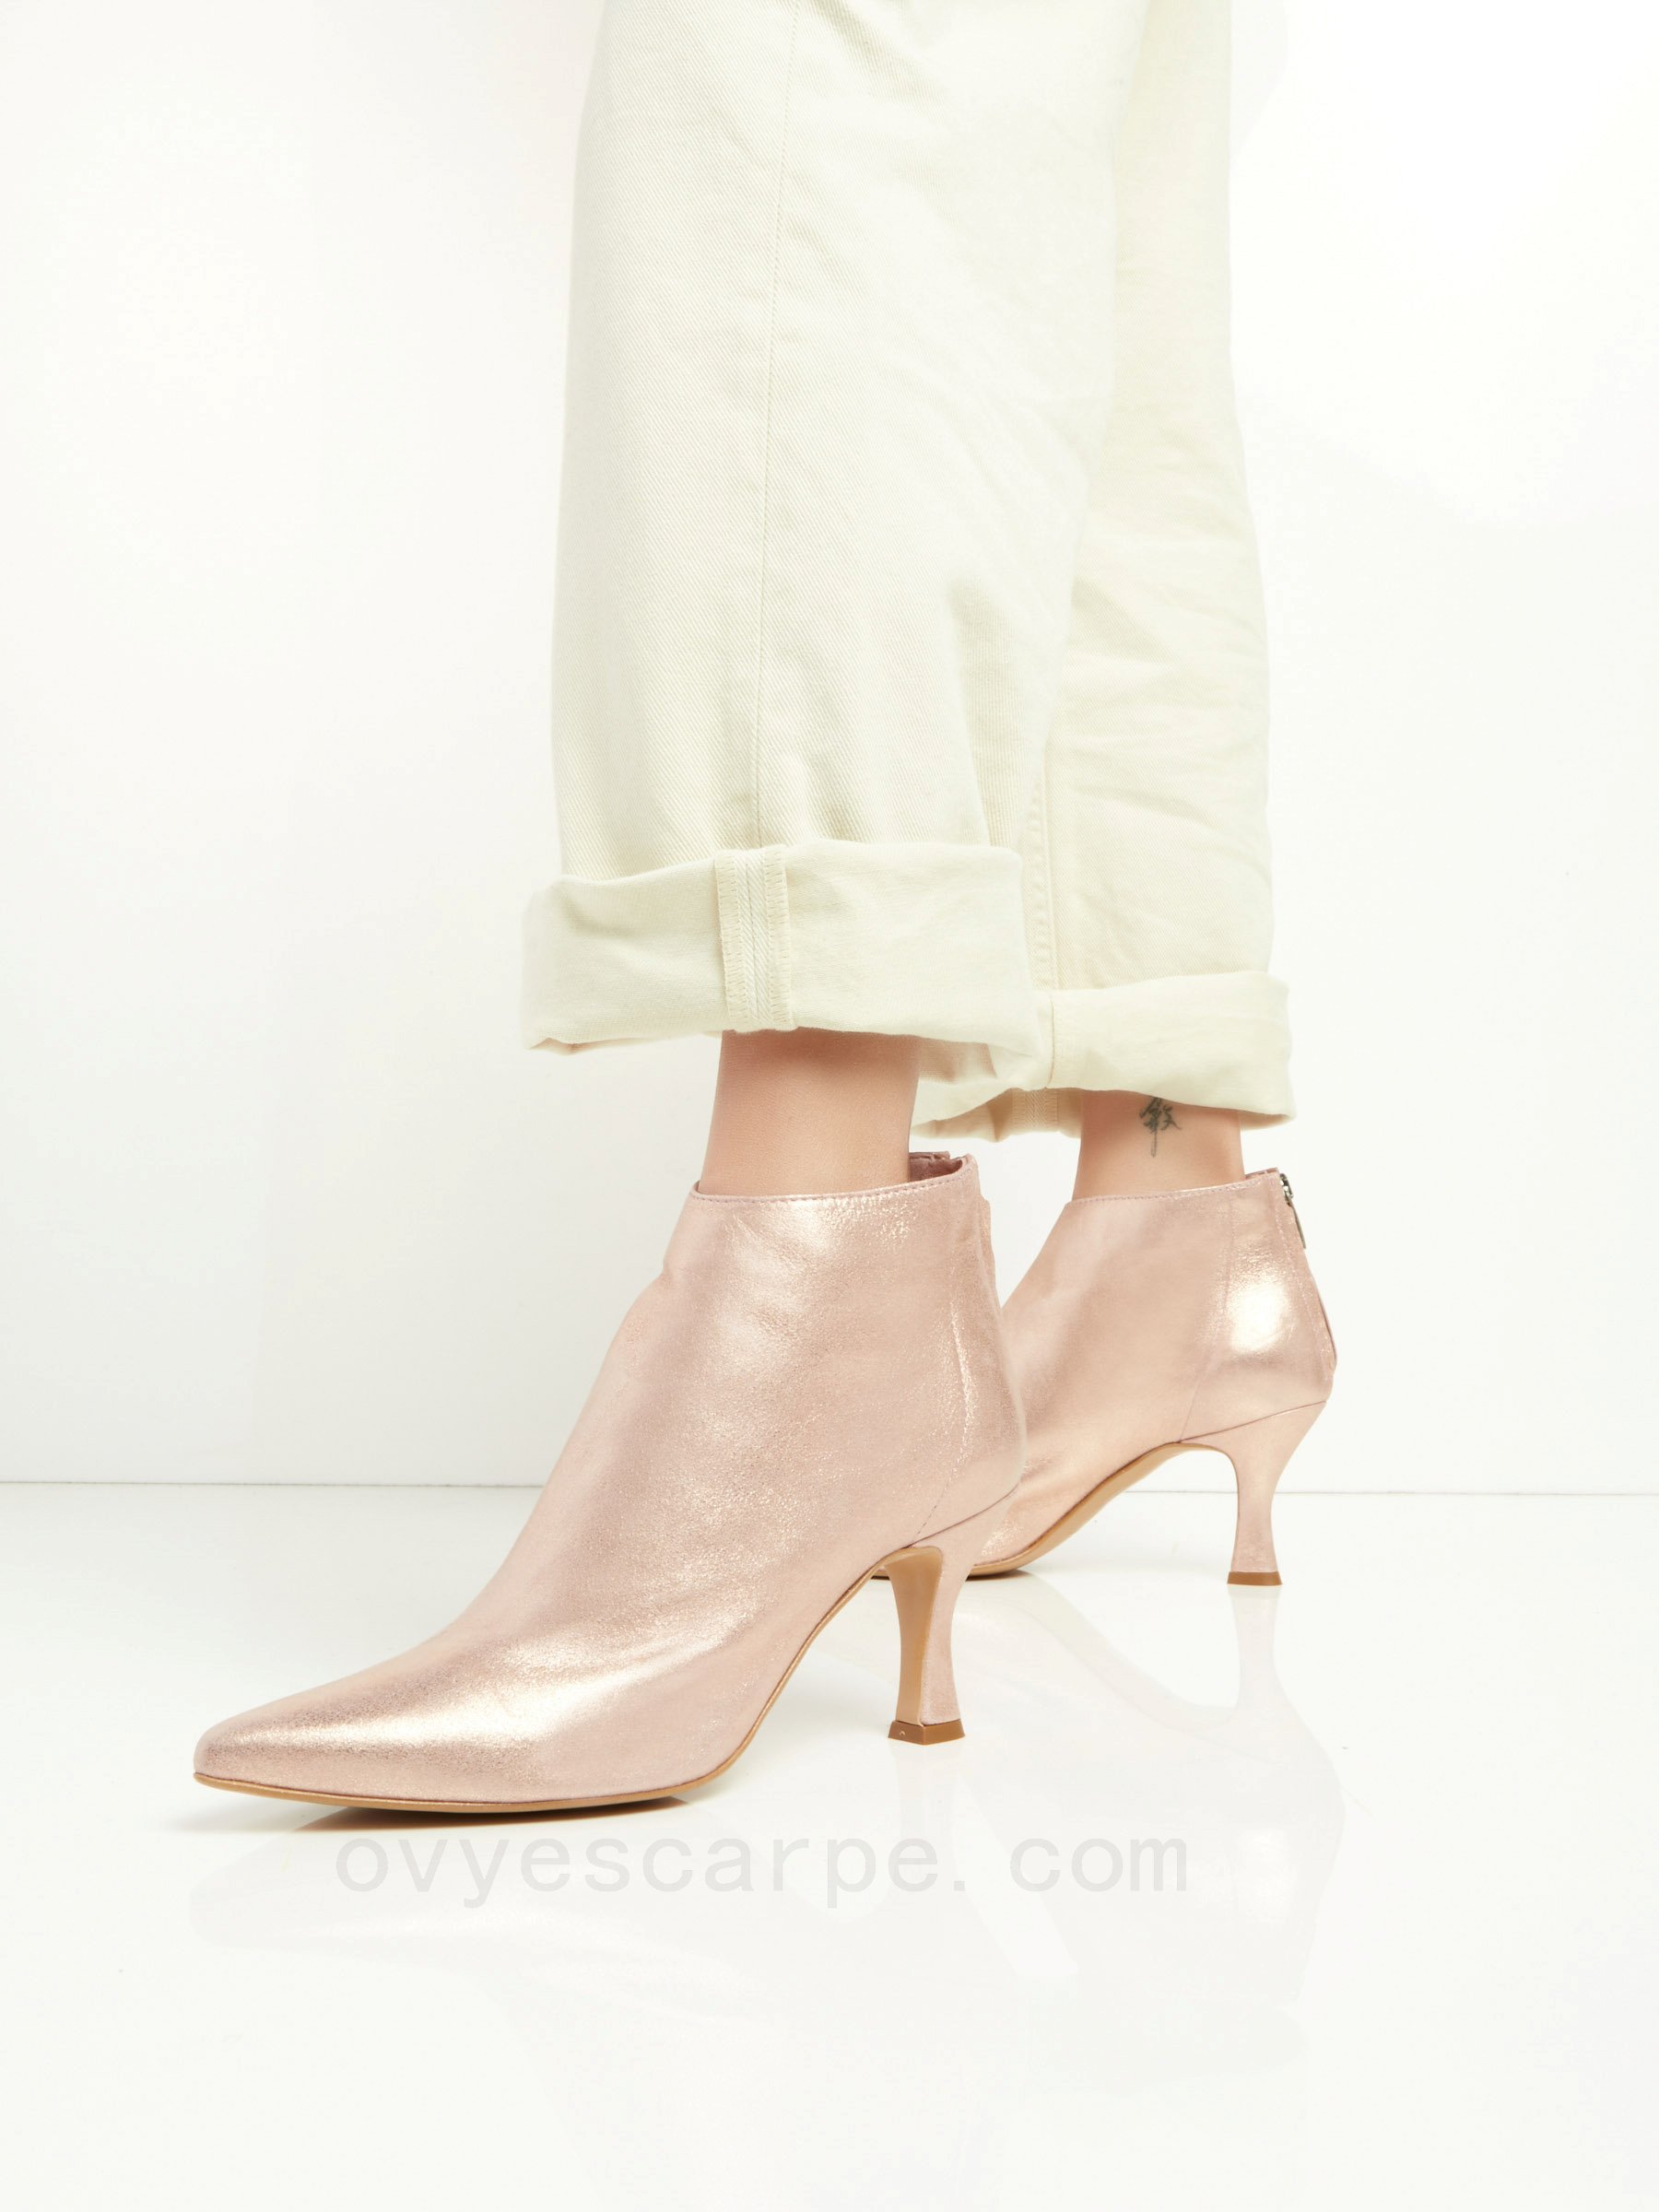 Leather Ankle Boots F08161027-0415 Acquistare